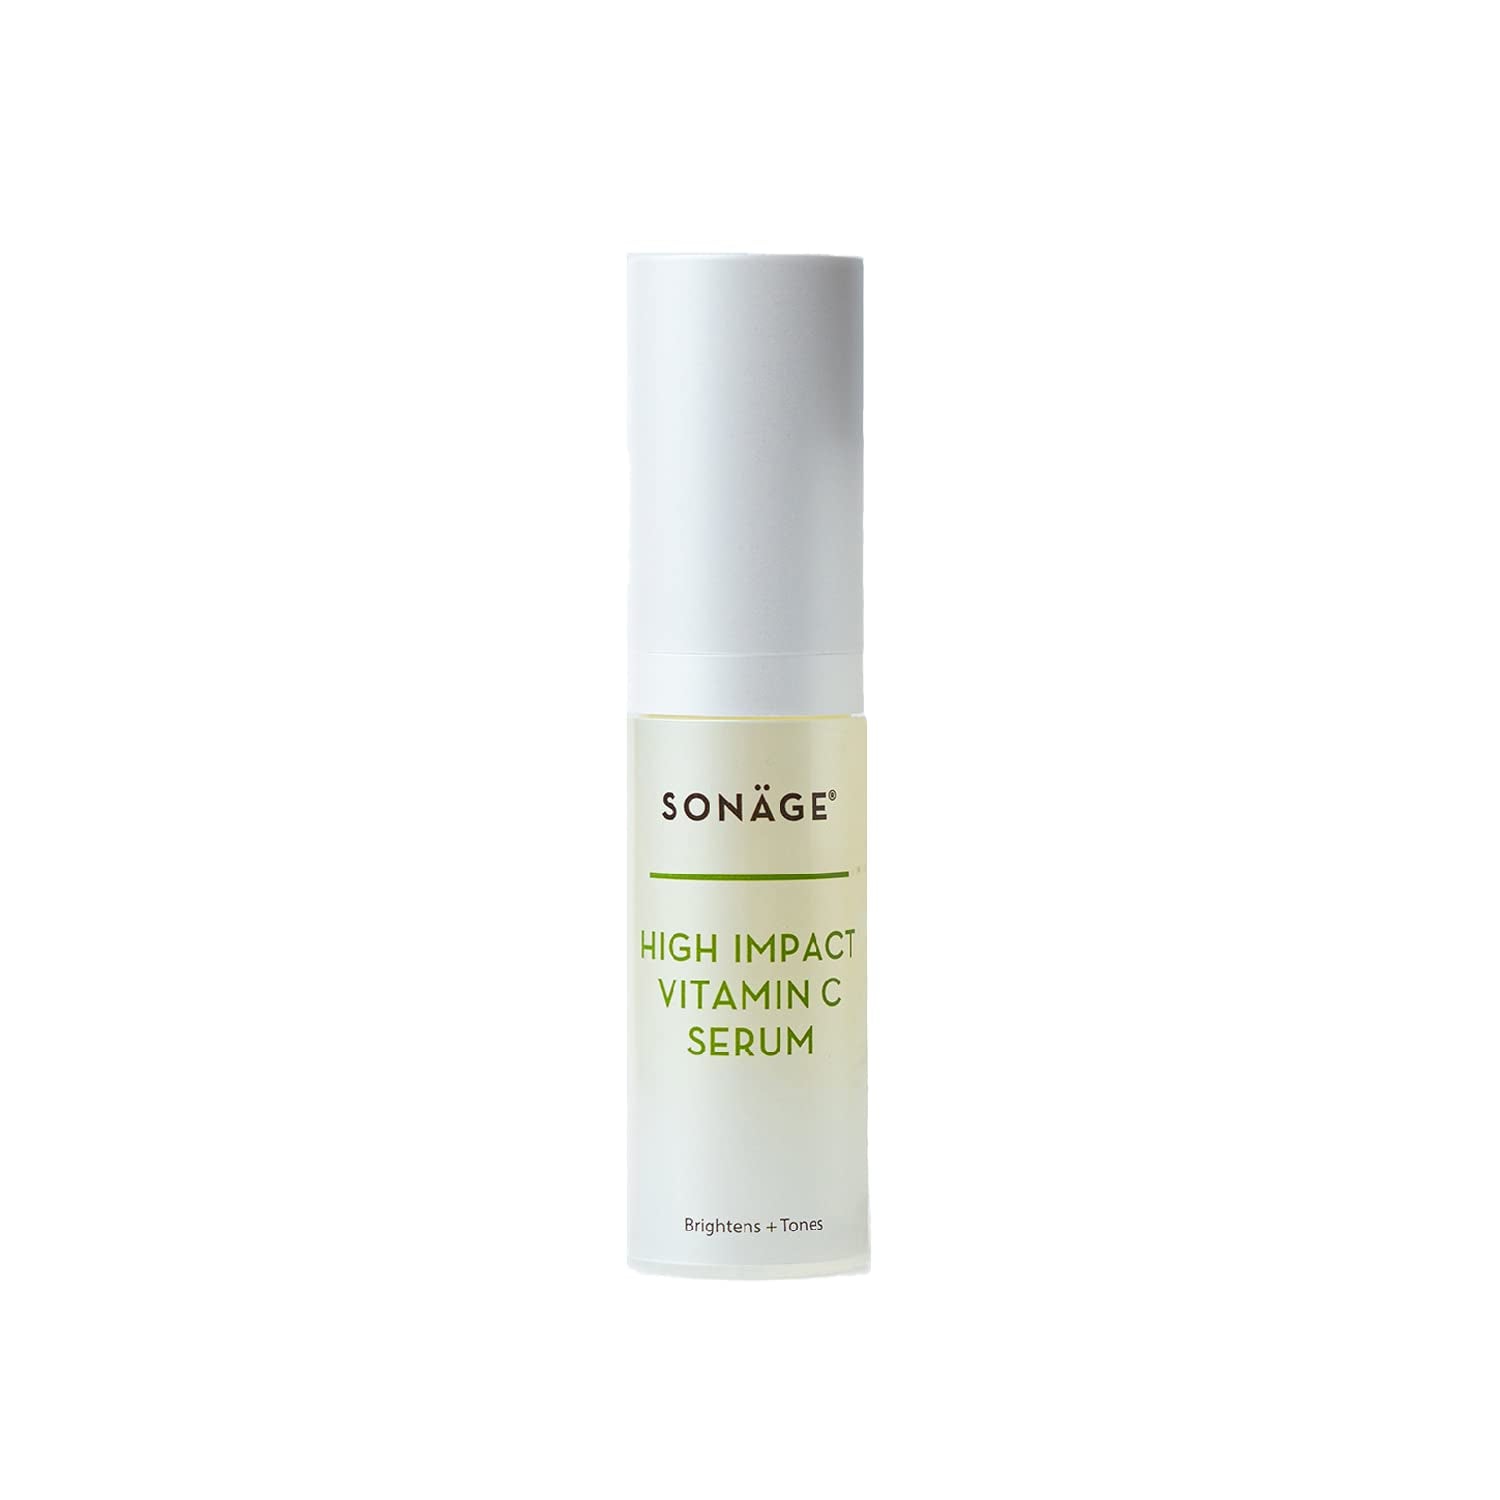 Sonage High Impact Vitamin C Serum | Brightening and Anti Aging Serum with Pure Vitamin C, Hyaluronic Acid, Vitamin E | Reduces Appearance of Dark Spots Fine Lines, Wrinkles